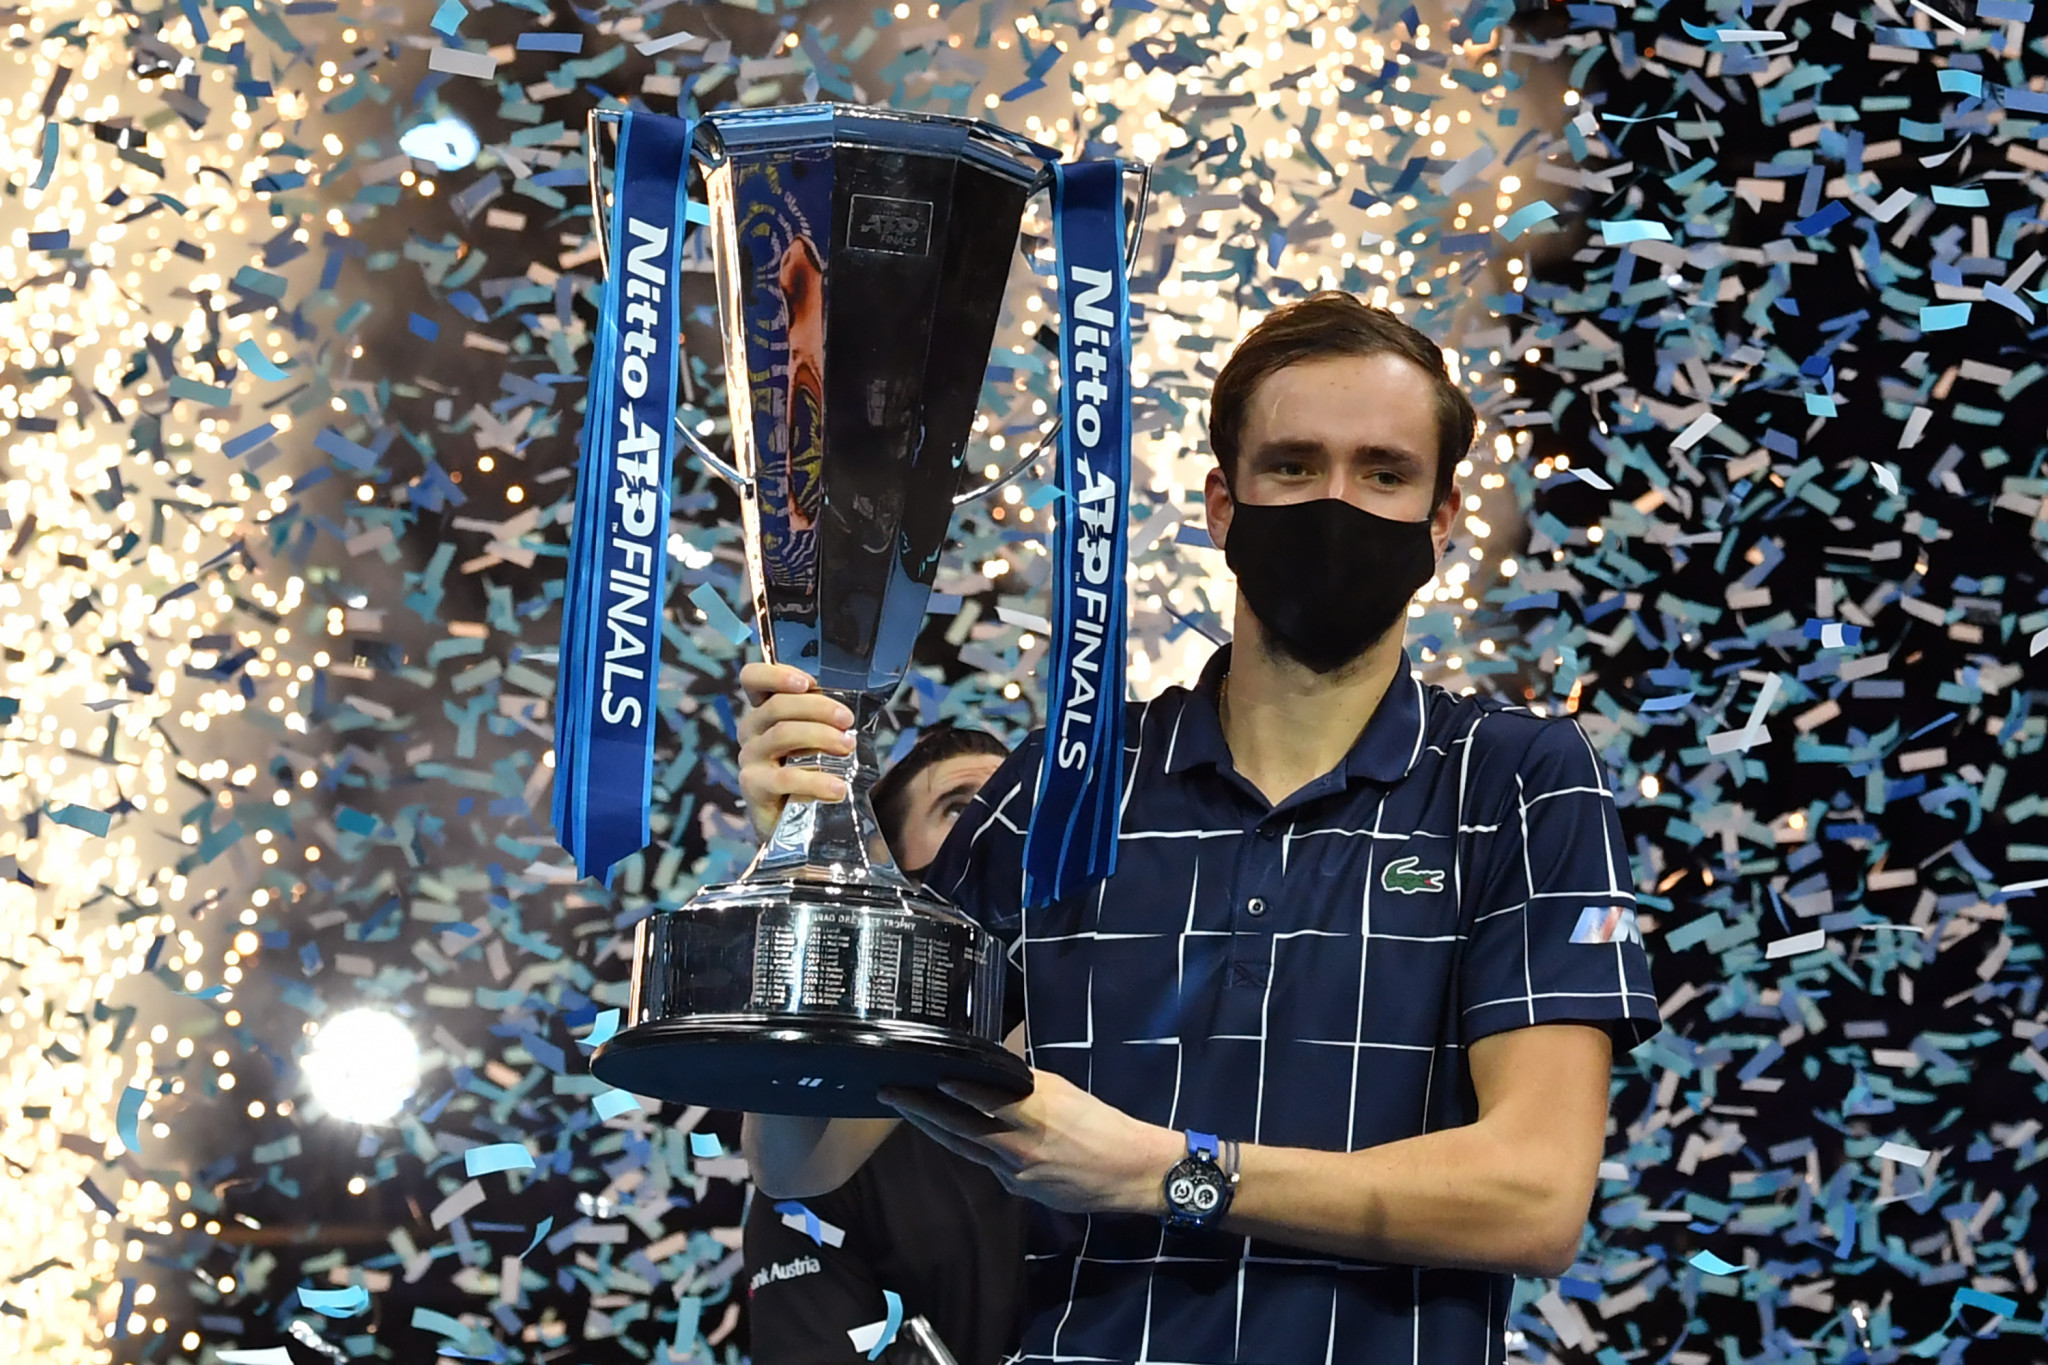 Medvedev fights back to beat Thiem and claim maiden ATP Finals title